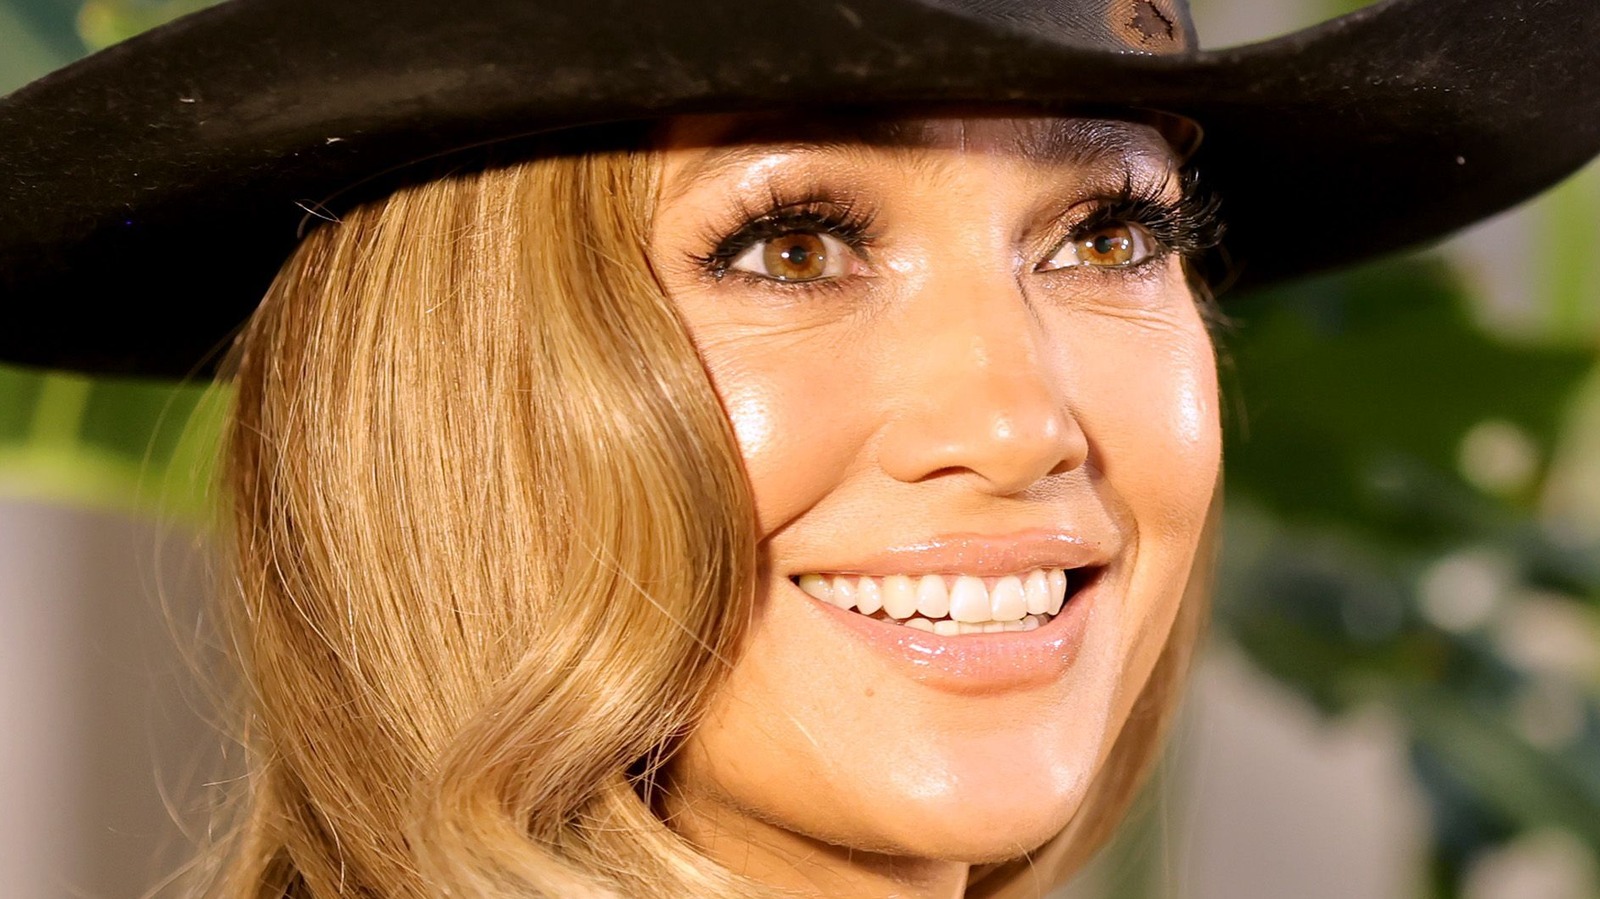 Jennifer Lopez S Contouring Method Will Give You The Perfect Chiseled And Lifted Look 247 News